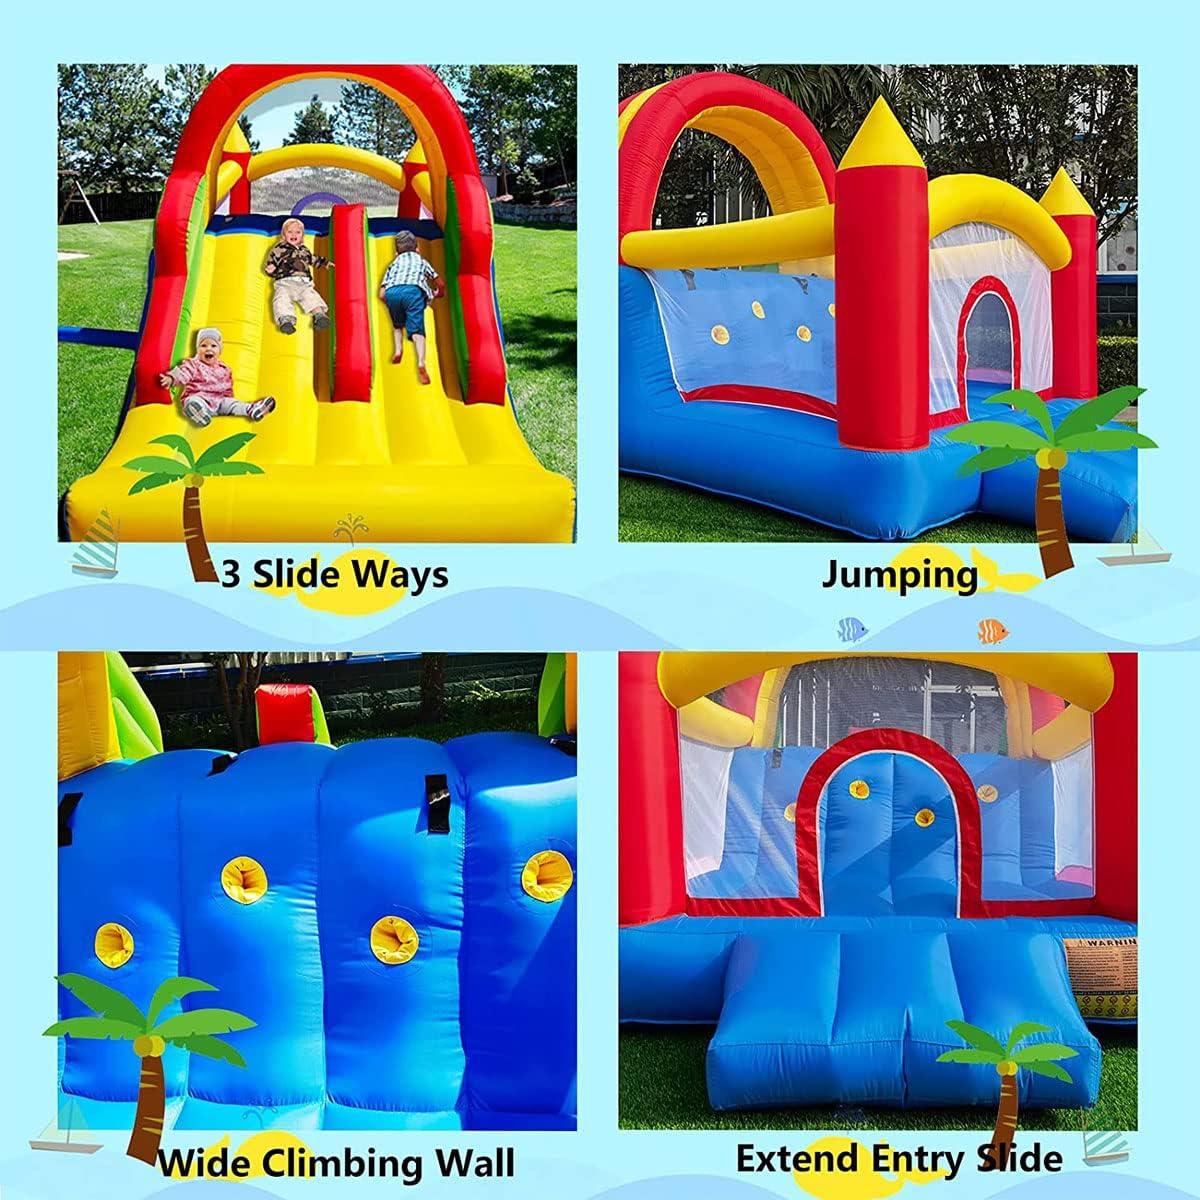 Ballsea Inflatable Bounce House Large Bouncy Castles Dual Slide Trampoline Climbing Wall with Blower for Kids Age 3-10, 4.88 x 2.23 x 2.2m